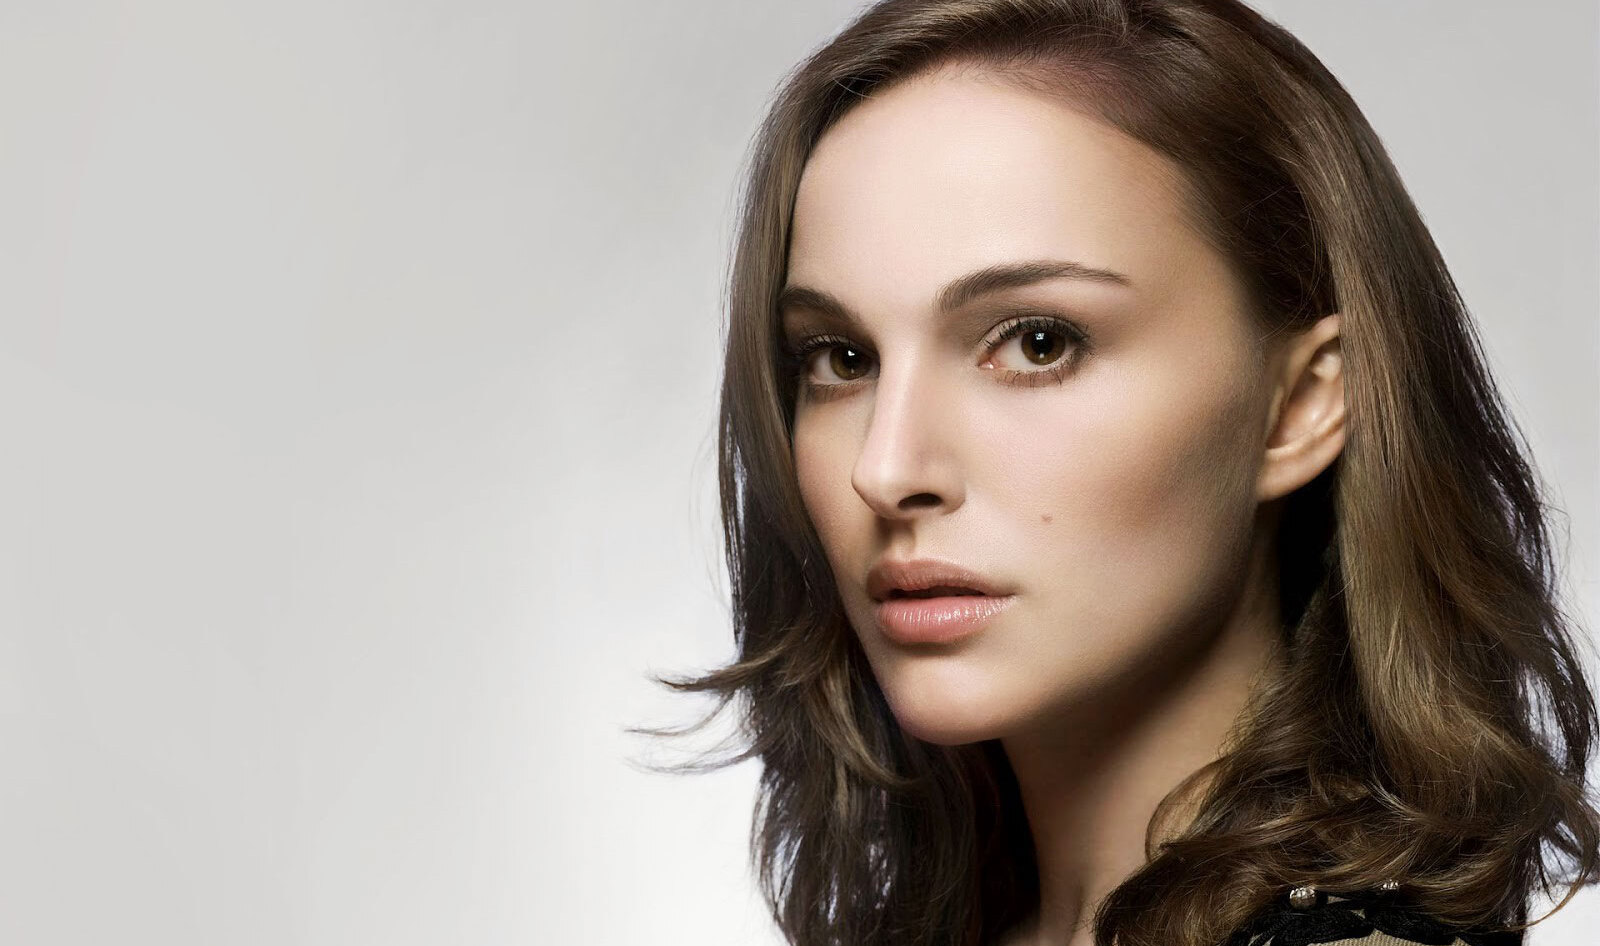 Vegan Actress Natalie Portman Speaks Out in Support of Defunding the Police to Save Black Lives